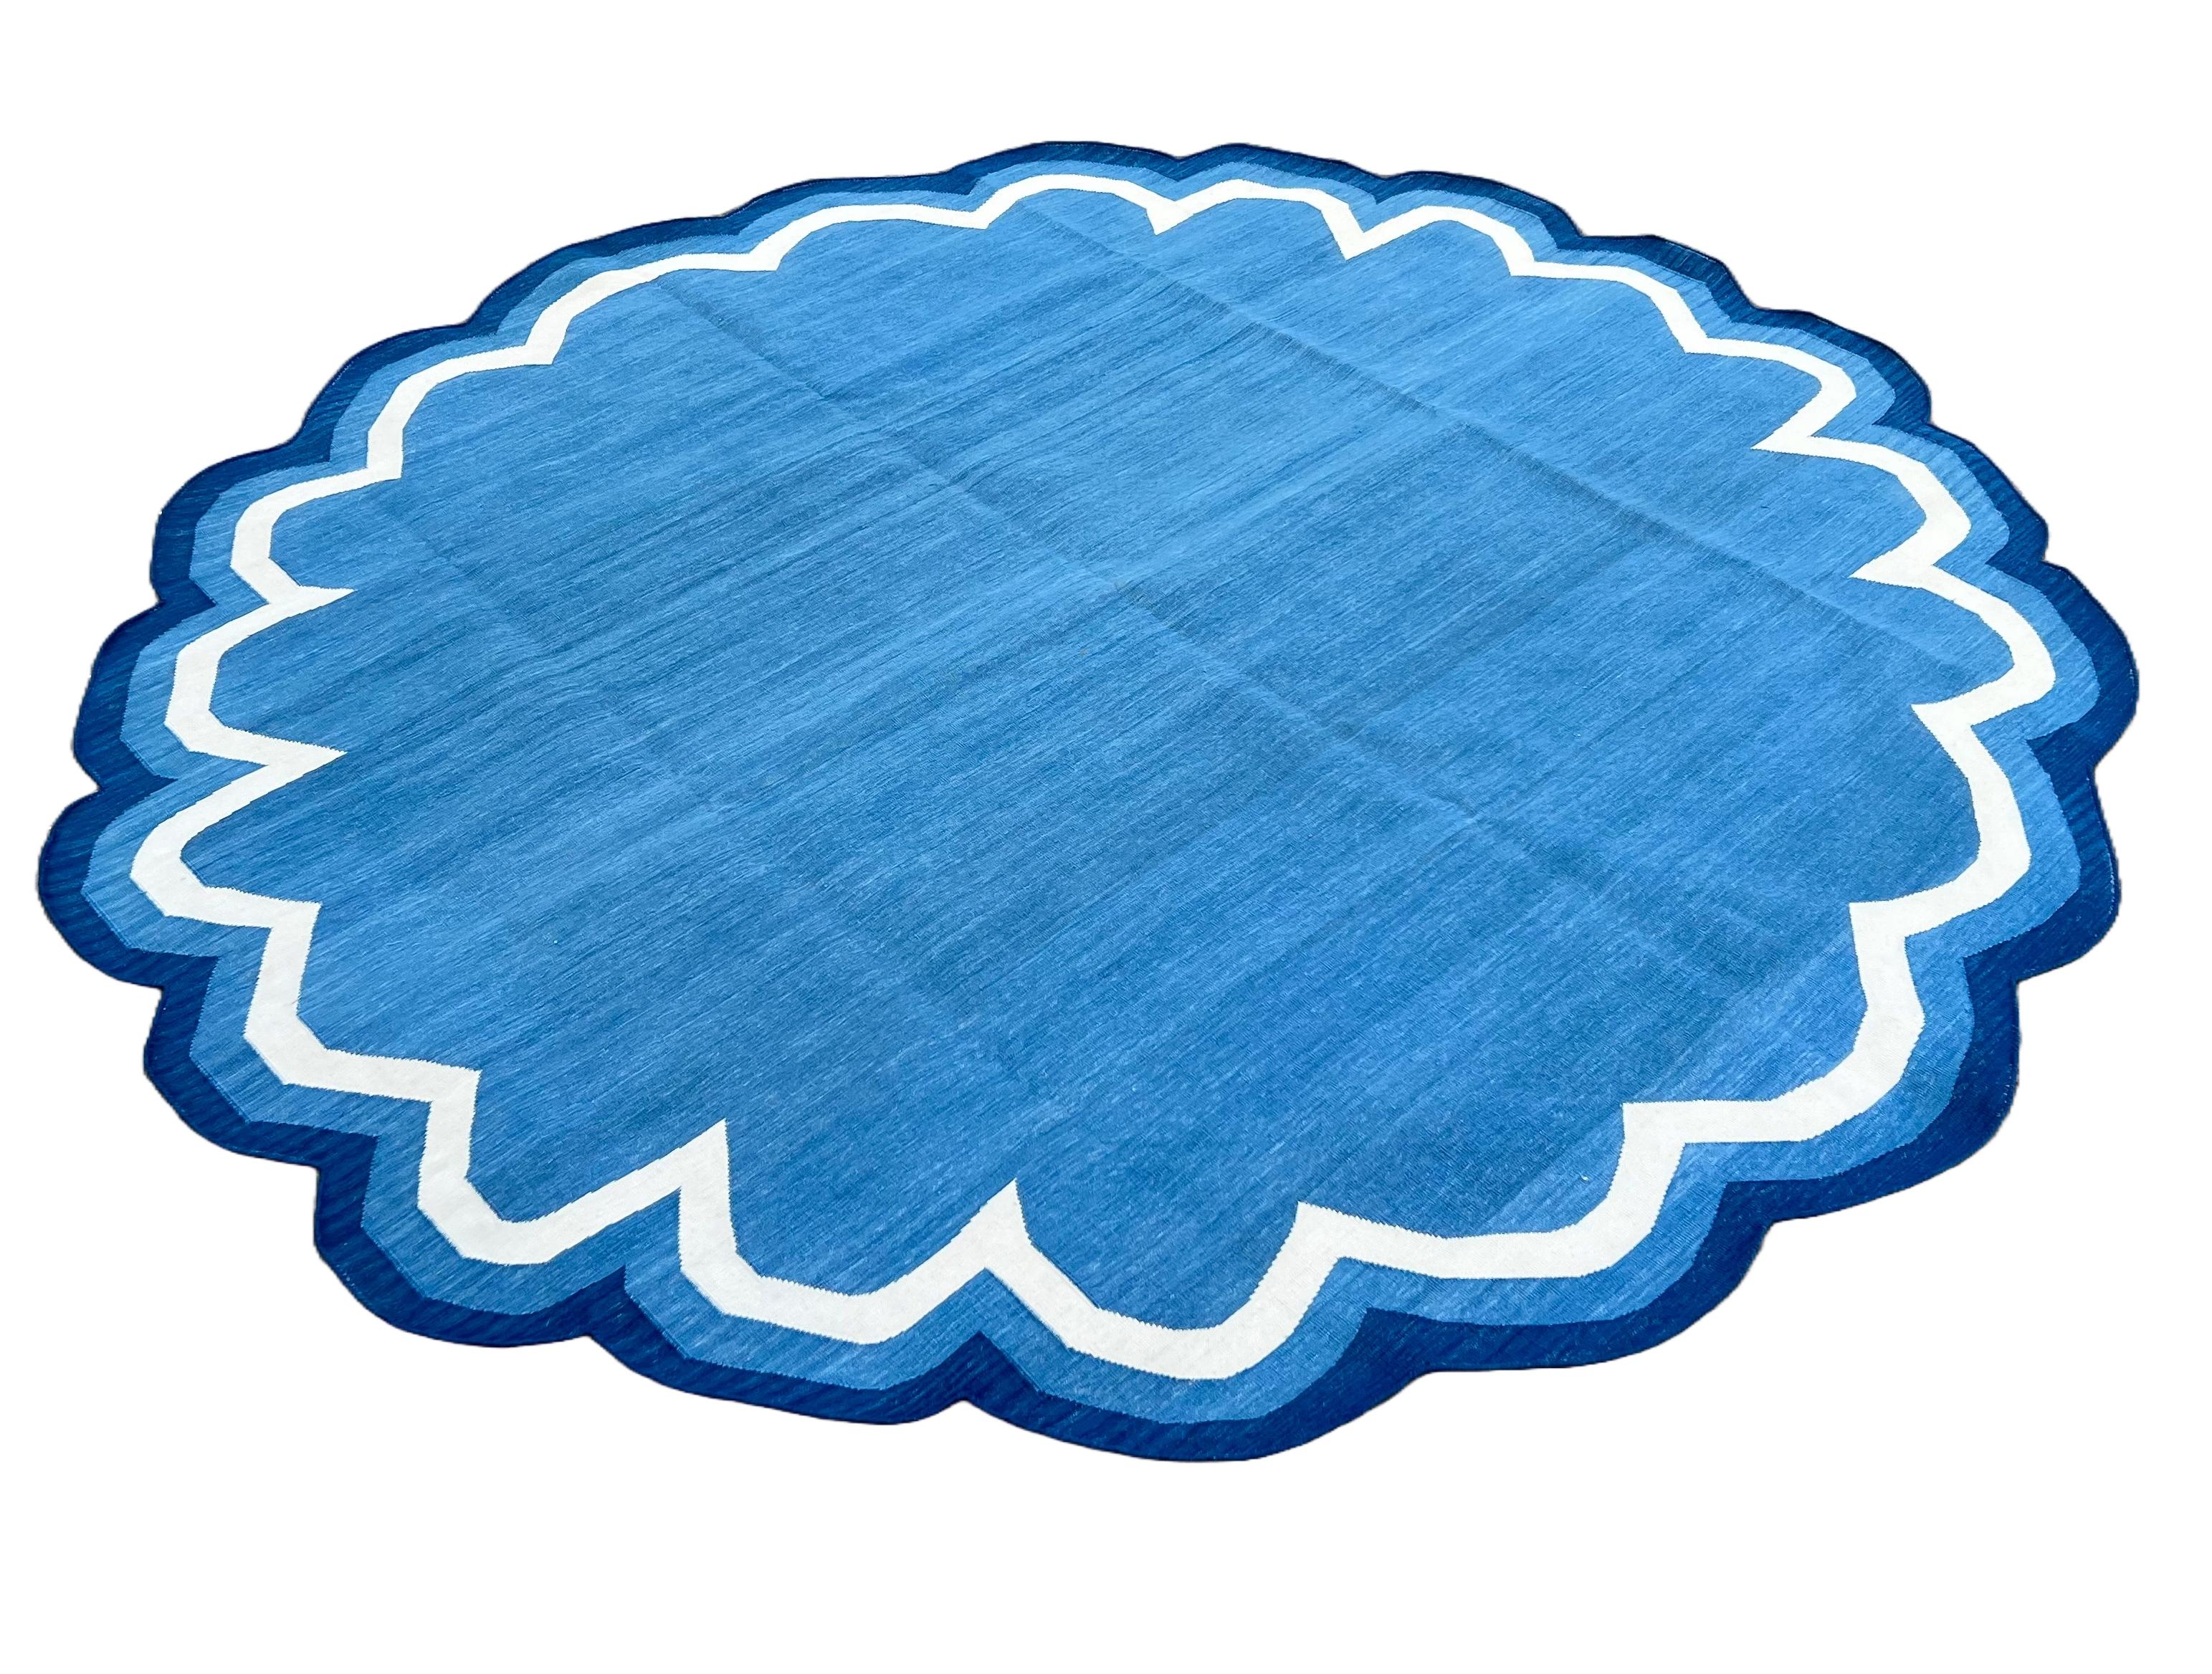 Cotton Vegetable Dyed Indigo Blue & White Round Scalloped Rug-6' Día 
These special flat-weave dhurries are hand-woven with 15 ply 100% cotton yarn. Due to the special manufacturing techniques used to create our rugs, the size and color of each